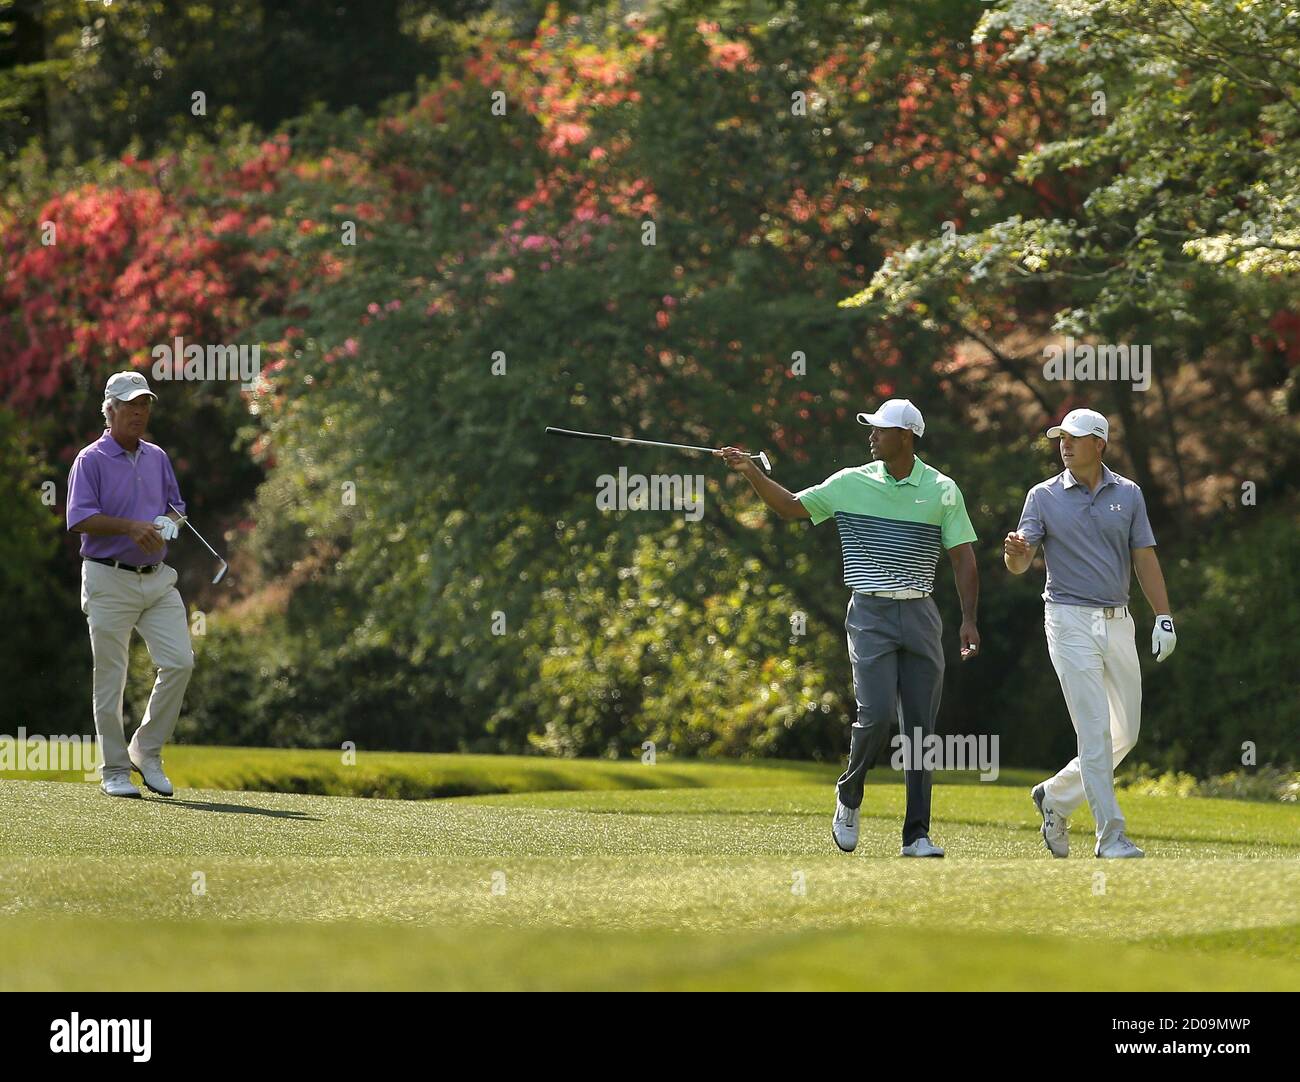 Jordan Spieth (R) gets some pointers from Tiger Woods as they walk up the 13th fairway with Ben Crenshaw (L) during a practice  round ahead of the 2015 Masters at Augusta National Golf Course in Augusta, Georgia April 8, 2015. Spieth's sublime putting on some of the most treacherous greens in golf, which set up his Masters victory on Sunday, was underpinned by his imaginative touch, says putting maestro Crenshaw. Picture taken April 8, 2015. REUTERS/Brian Snyder Stock Photo